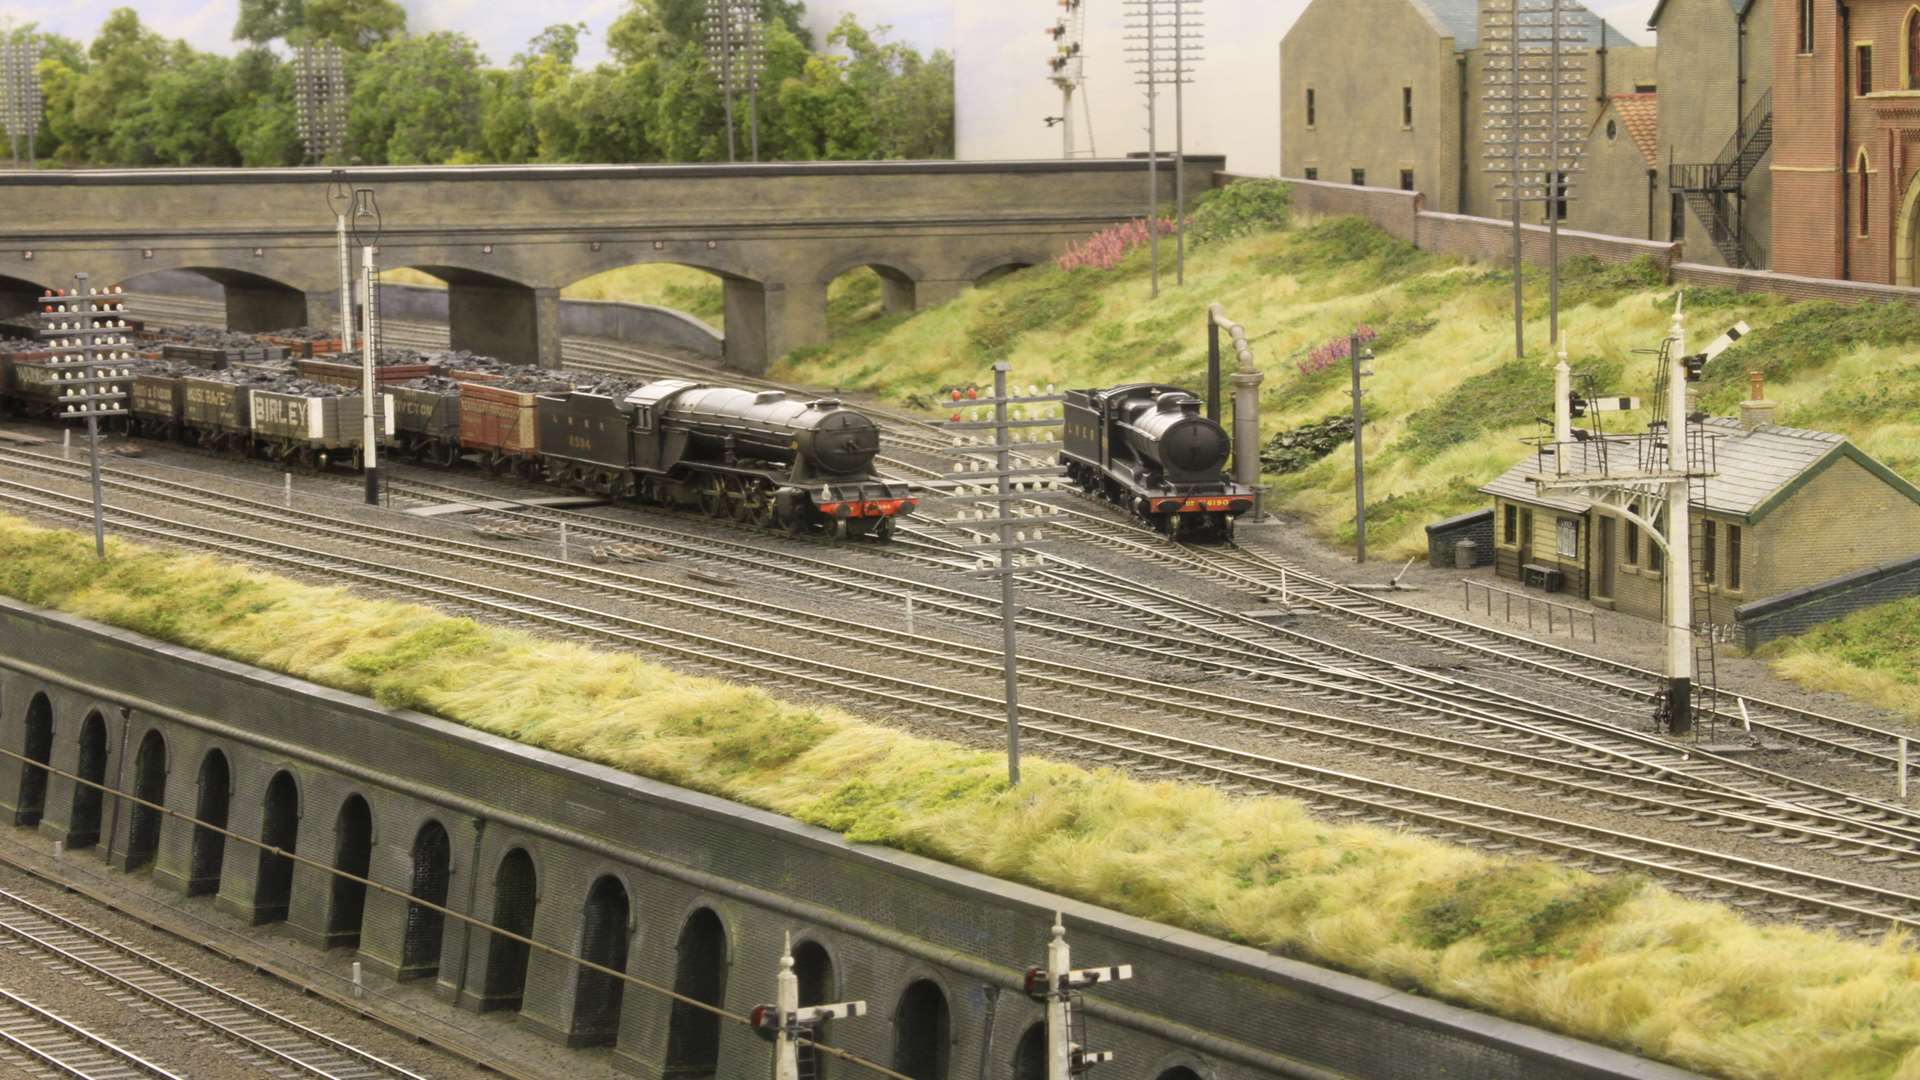 Model railway enthusiasts are hoping to open a railway heritage and model railway museum in Ashford's old railway works